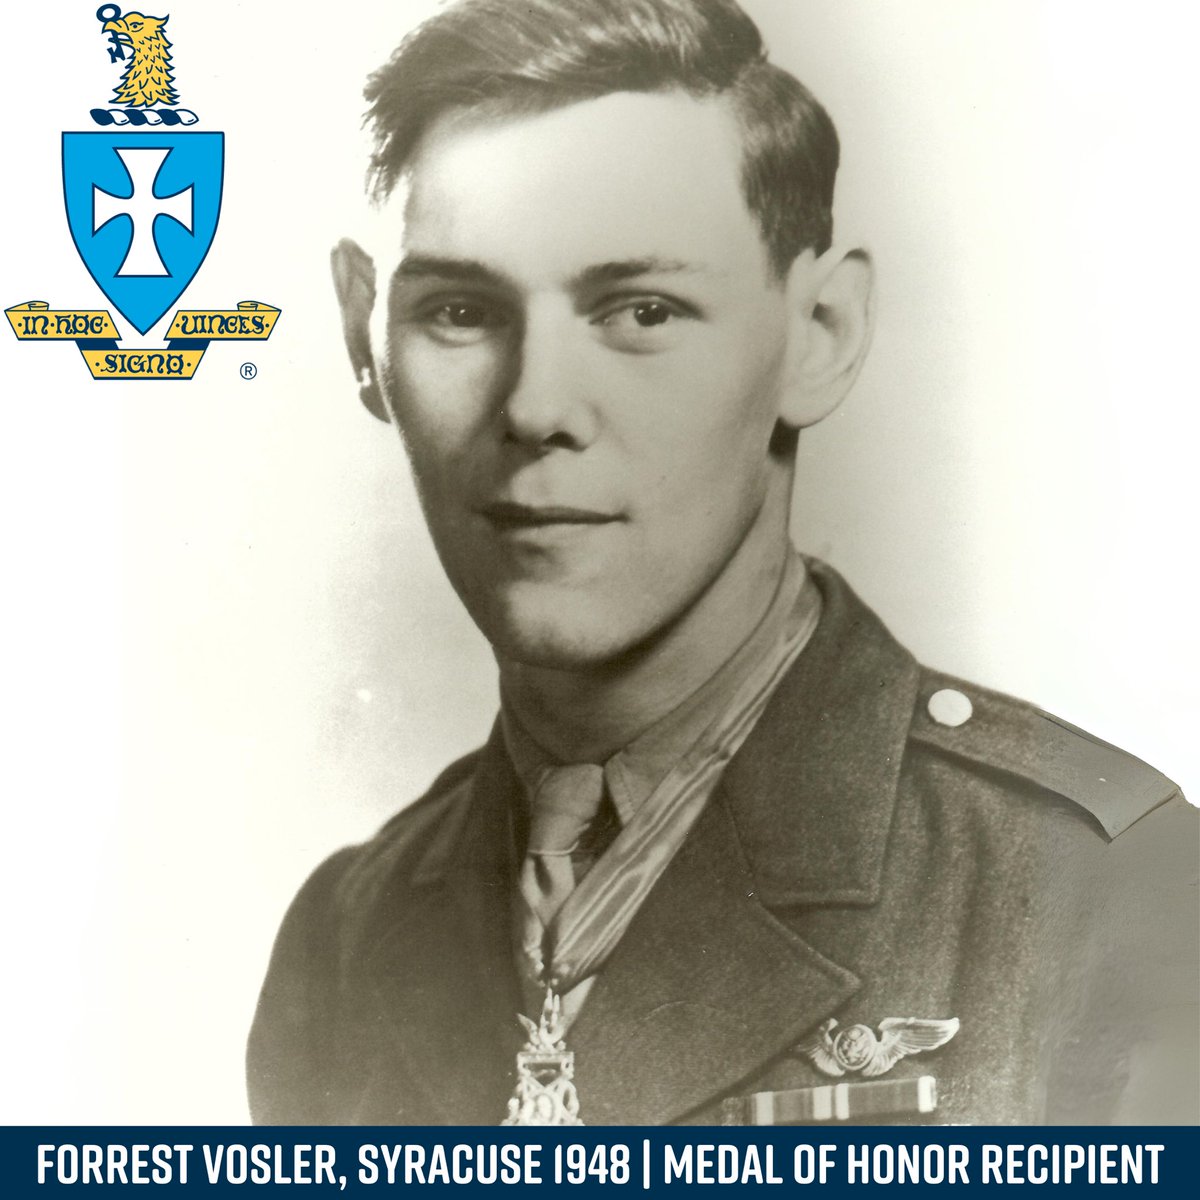 Today on National Medal of Honor Day, we salute all who have served our country. Three brothers, Maurice Britt, ARKANSAS 1941; George Cannon, MICHIGAN 1938; Forrest Vosler, SYRACUSE 1948 served in WWII and received the highest military decoration. All Honor to their names.